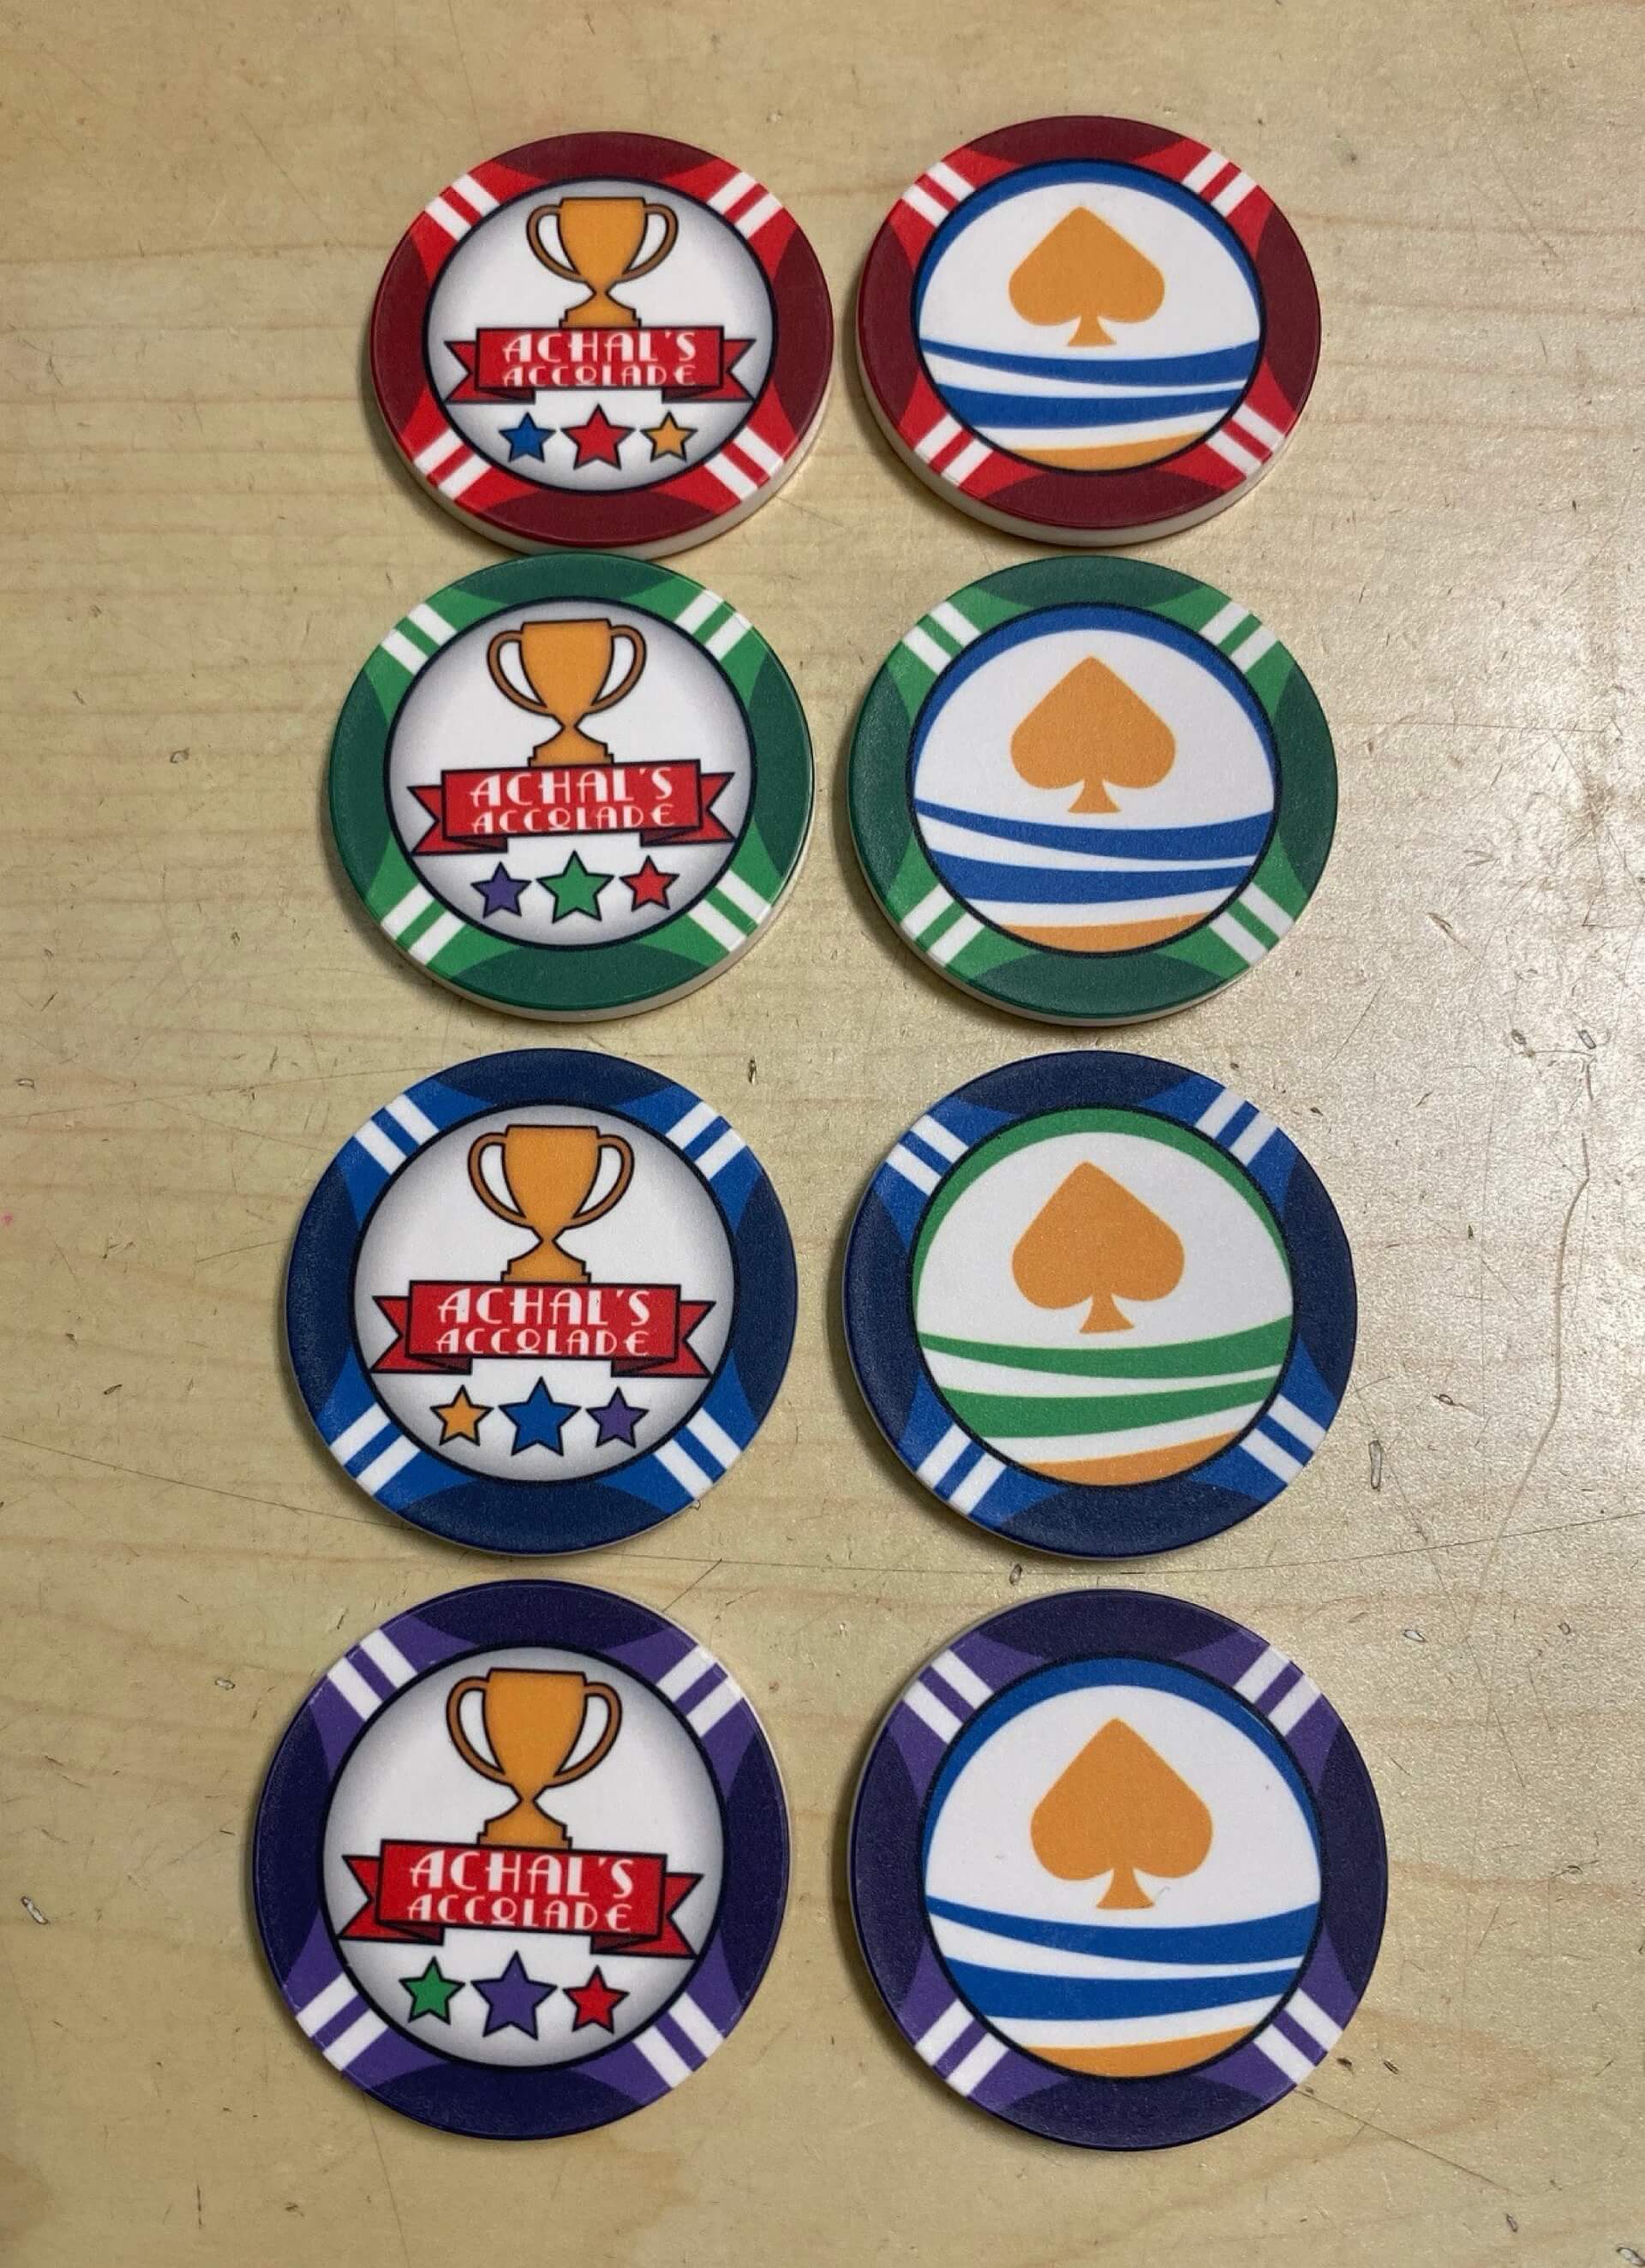 Aurora Poker Gear Custom Reward Token Chip Set for Client - Achal's Accolade - Set of ceramic reward tokens made by Aurora Poker Gear, feature company logo and text, come in various colors, given for merit and achievements.